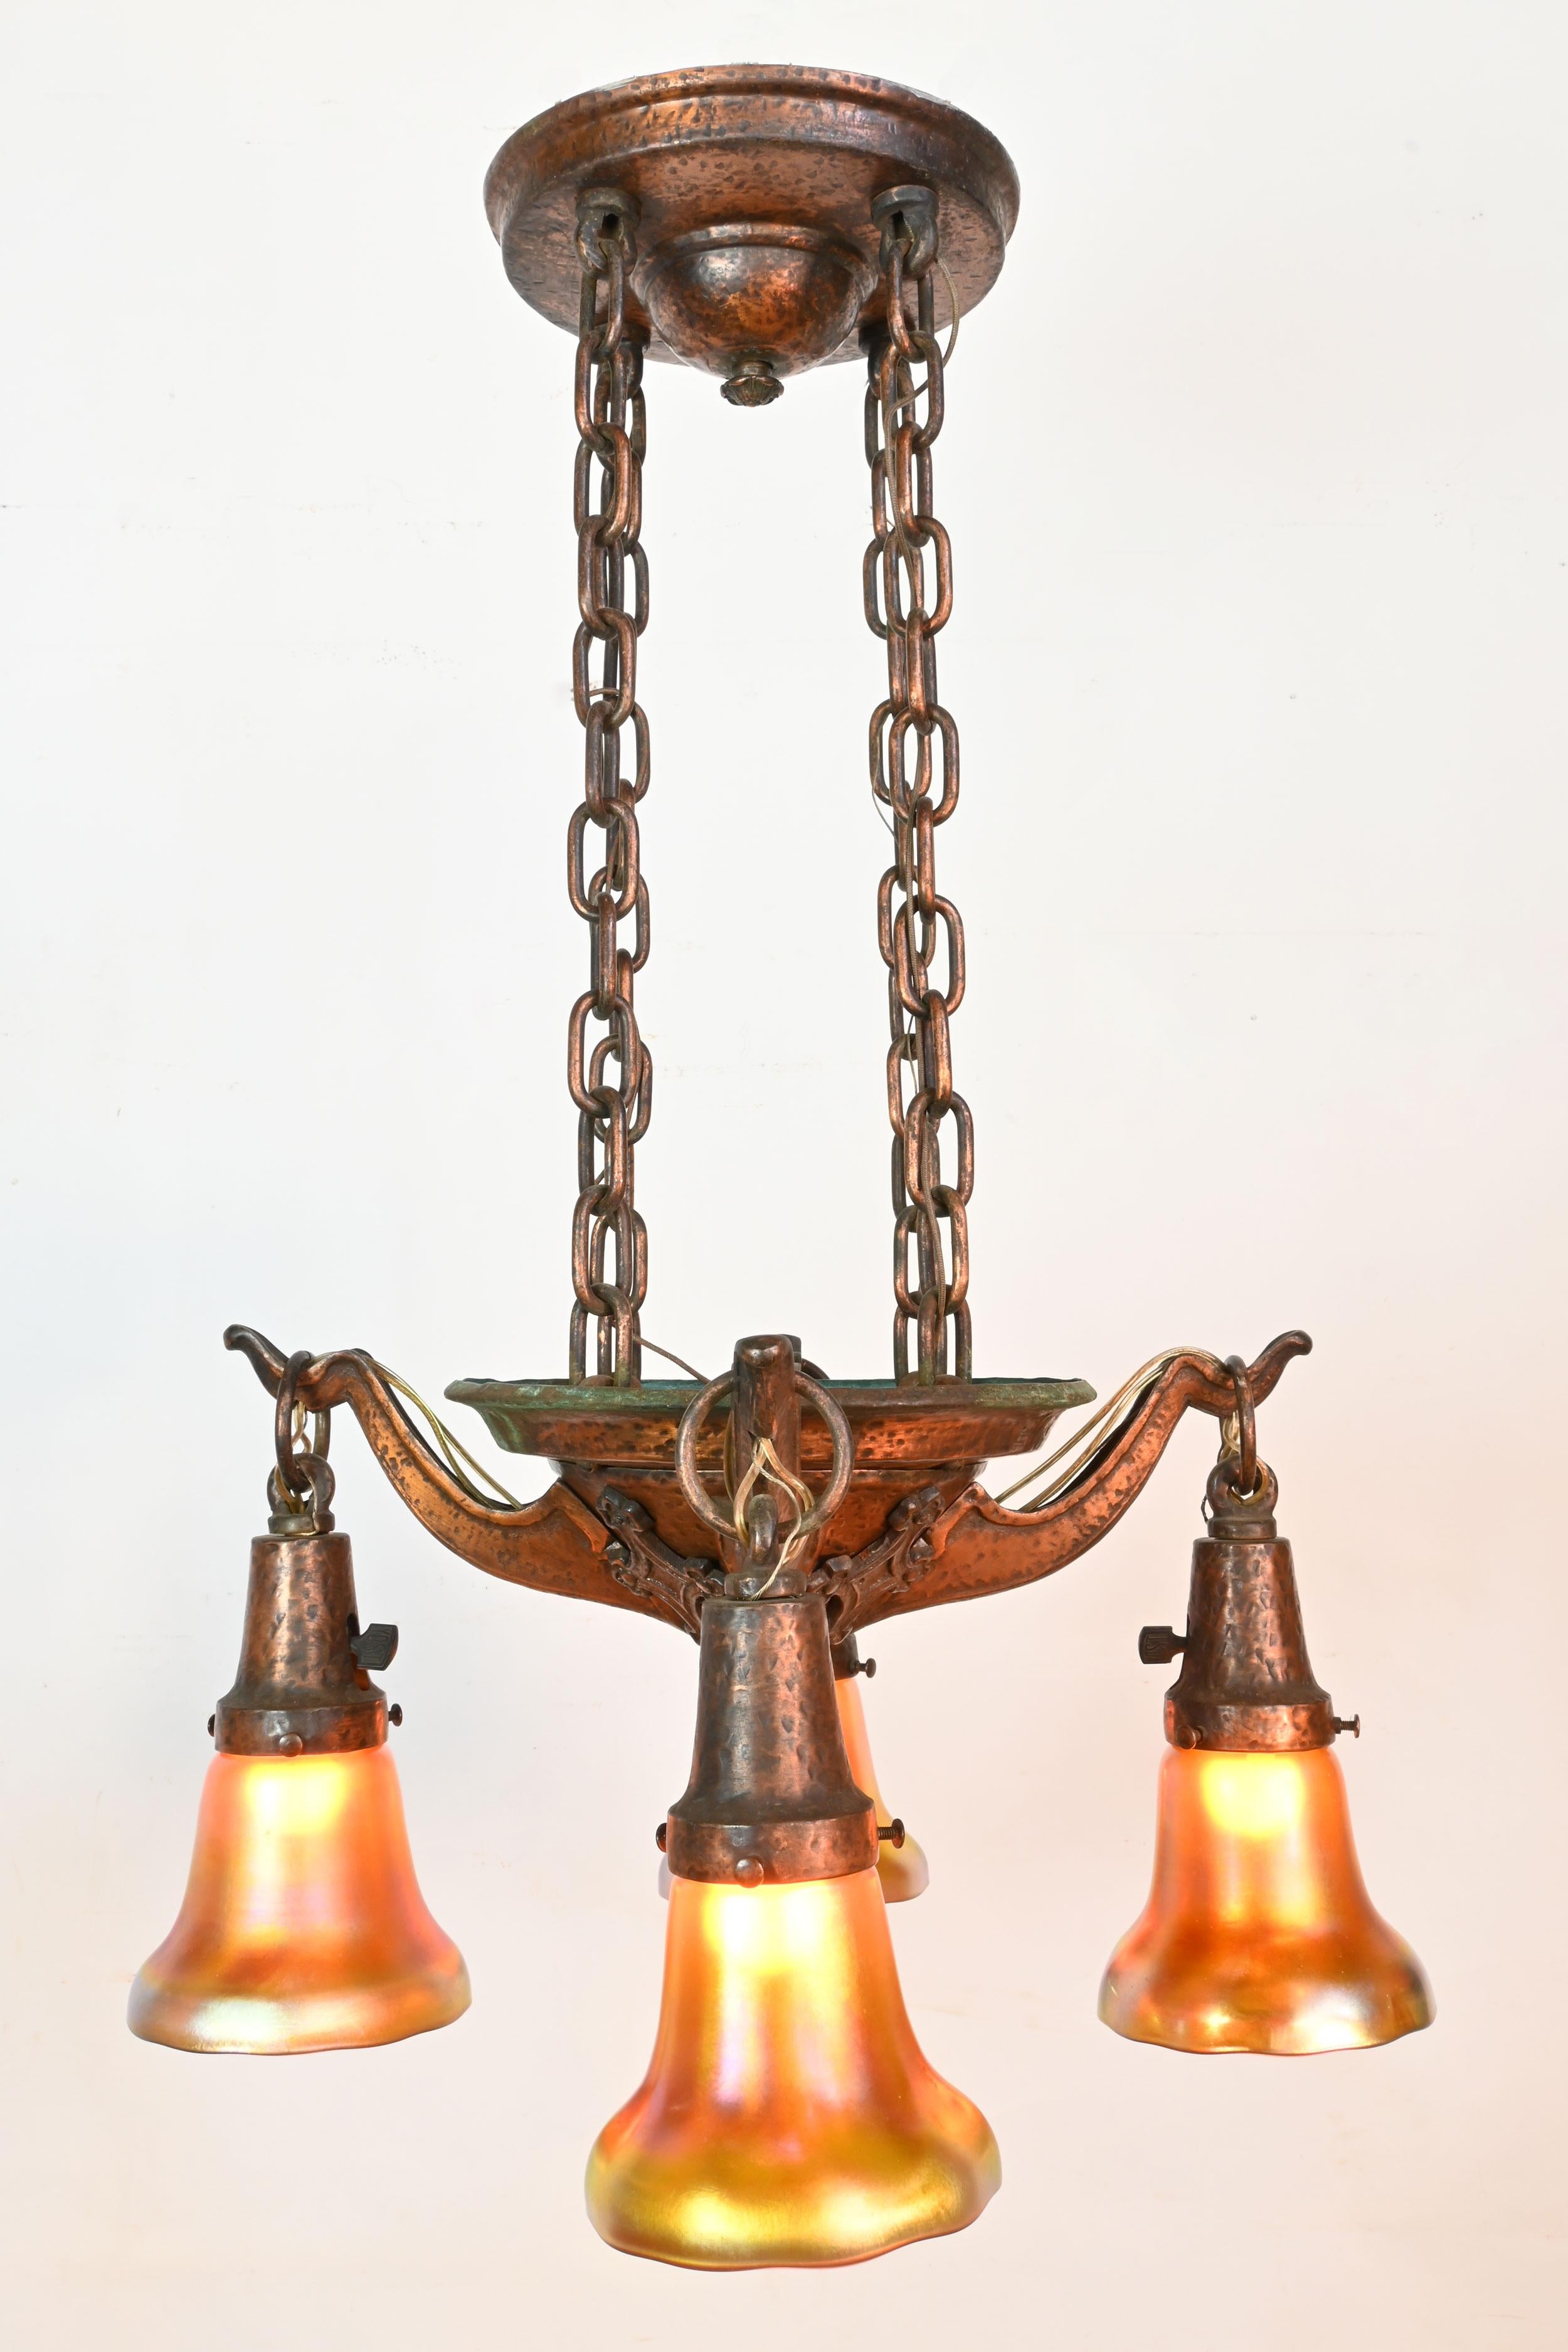 Stupendous detail in this 4 arm chandelier, the large amount of copper in the bronze has given rise to a unique patina. The length of the chandelier adds to its grandiose feel but nothing shows the artistry in this light like the coloring of the